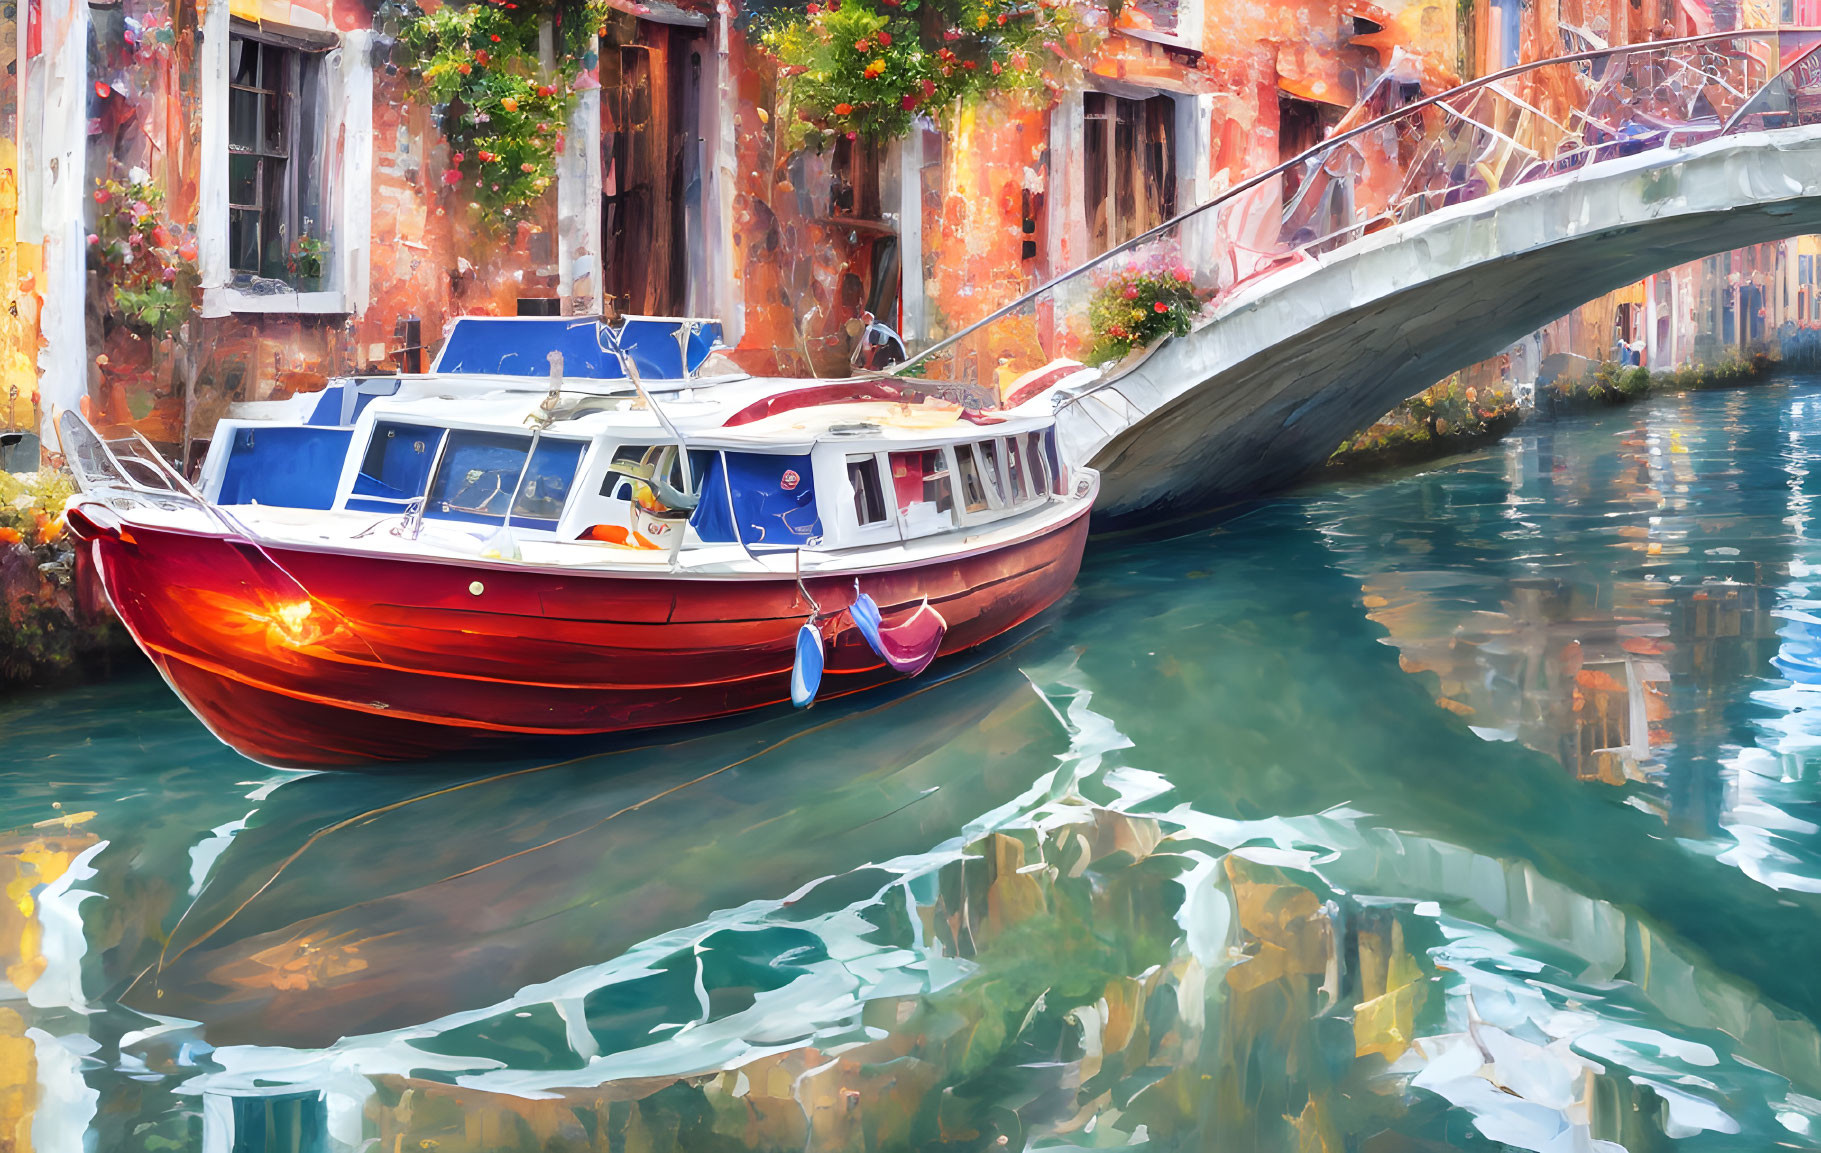 Red boat under stone bridge by building with orange blossoms in Venetian canal